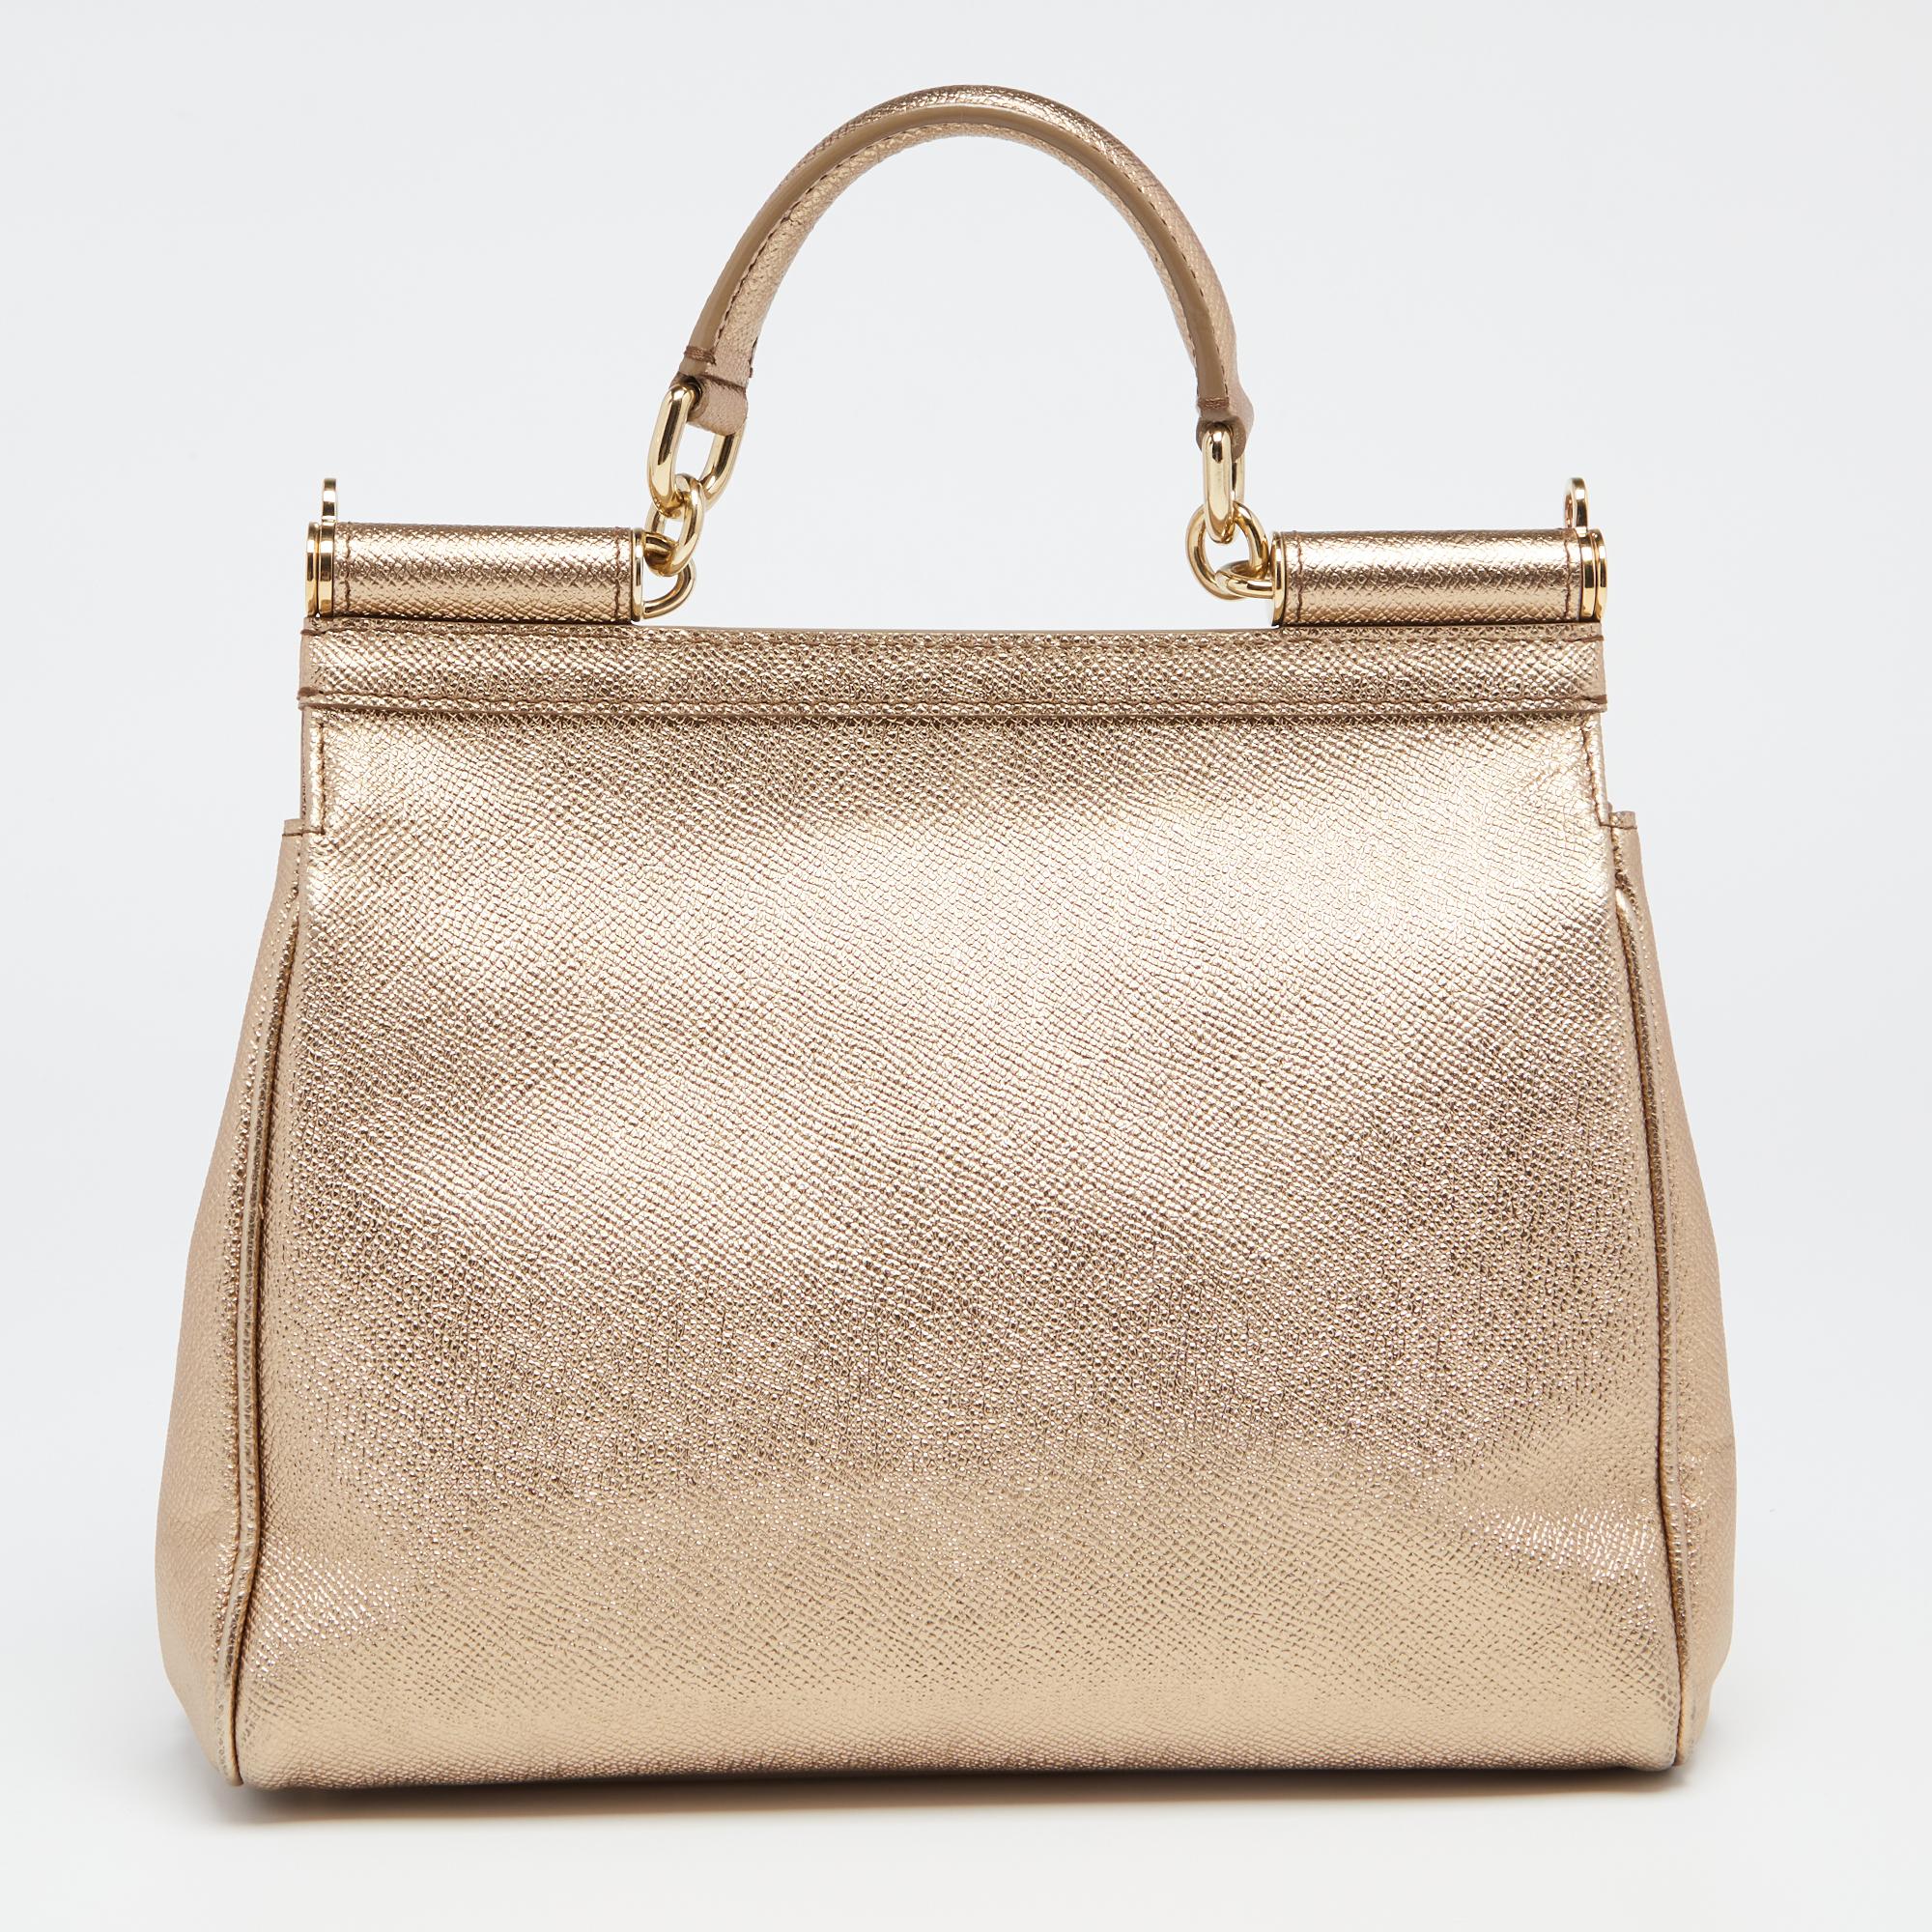 Meticulously crafted into an eye-catchy shape, this Miss Sicily bag from the House of Dolce & Gabbana exudes just the right amount of charm and elegance! It is made from metallic-gold leather, with a gold-toned logo plaque accentuating the front. It